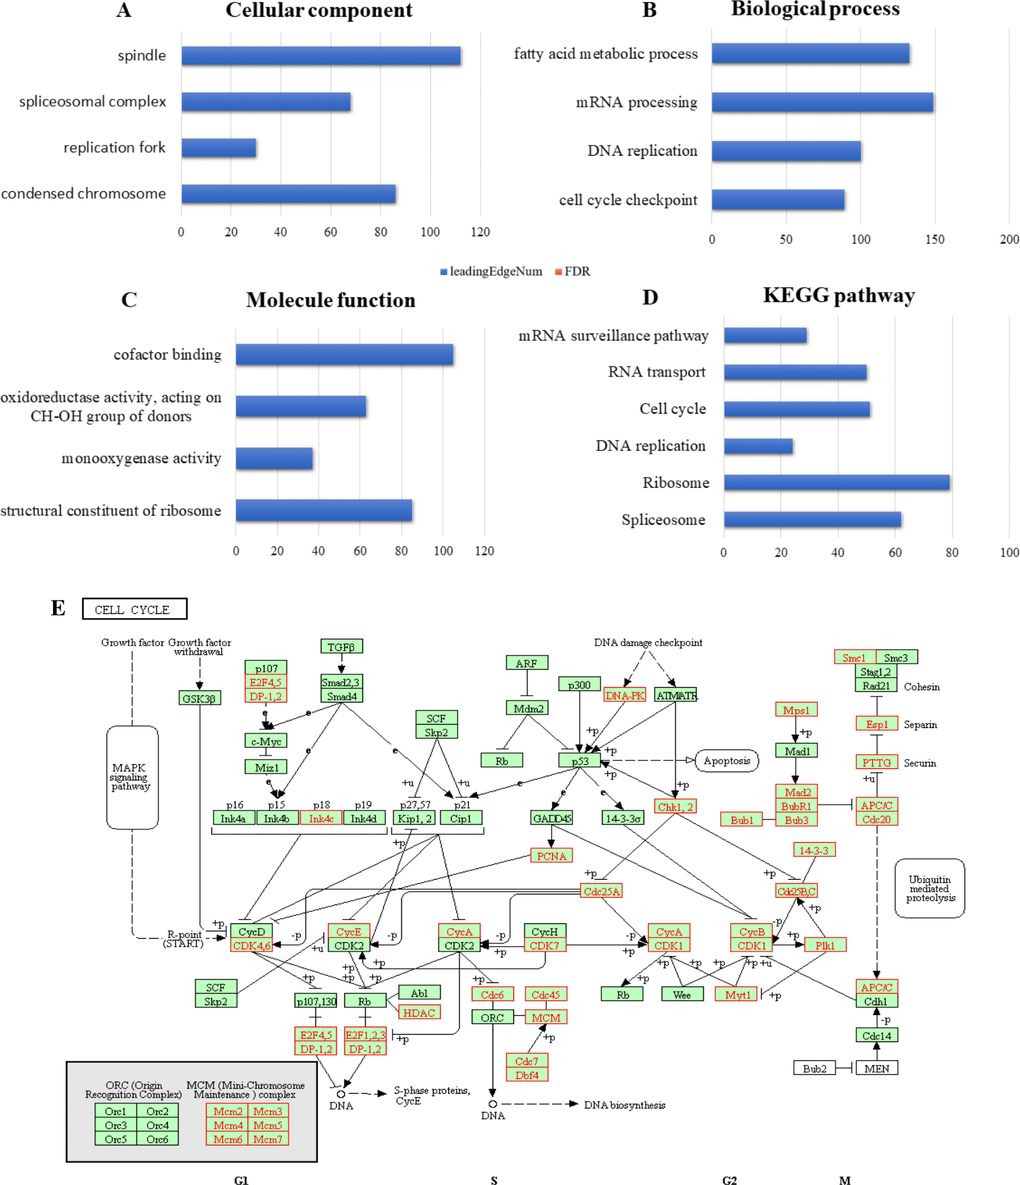 Significantly enriched GO annotations and KEGG pathways of RBM8A in hepatocellular carcinoma